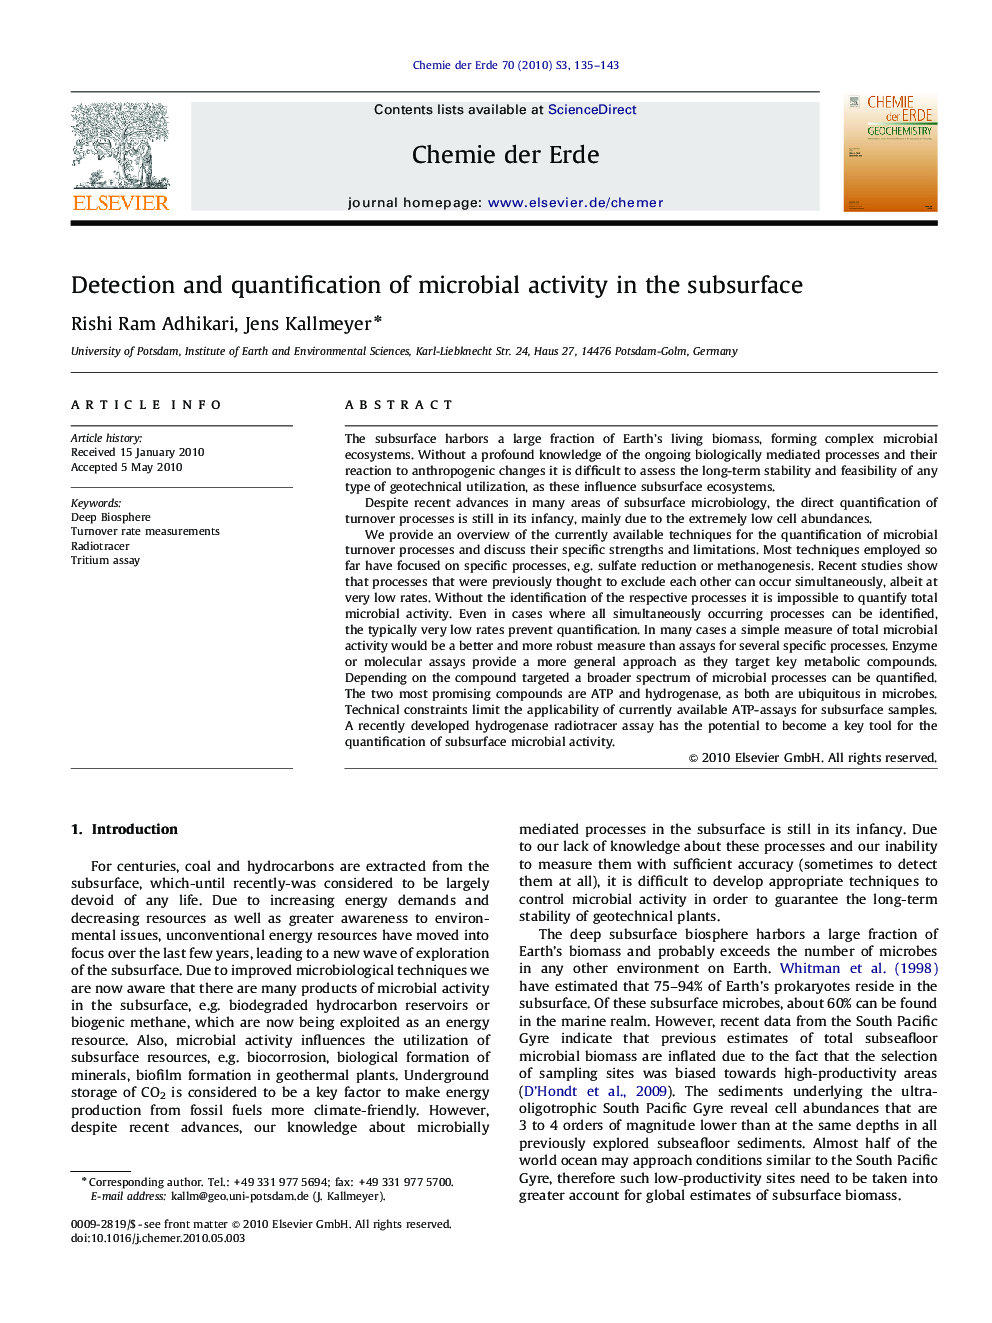 Detection and quantification of microbial activity in the subsurface